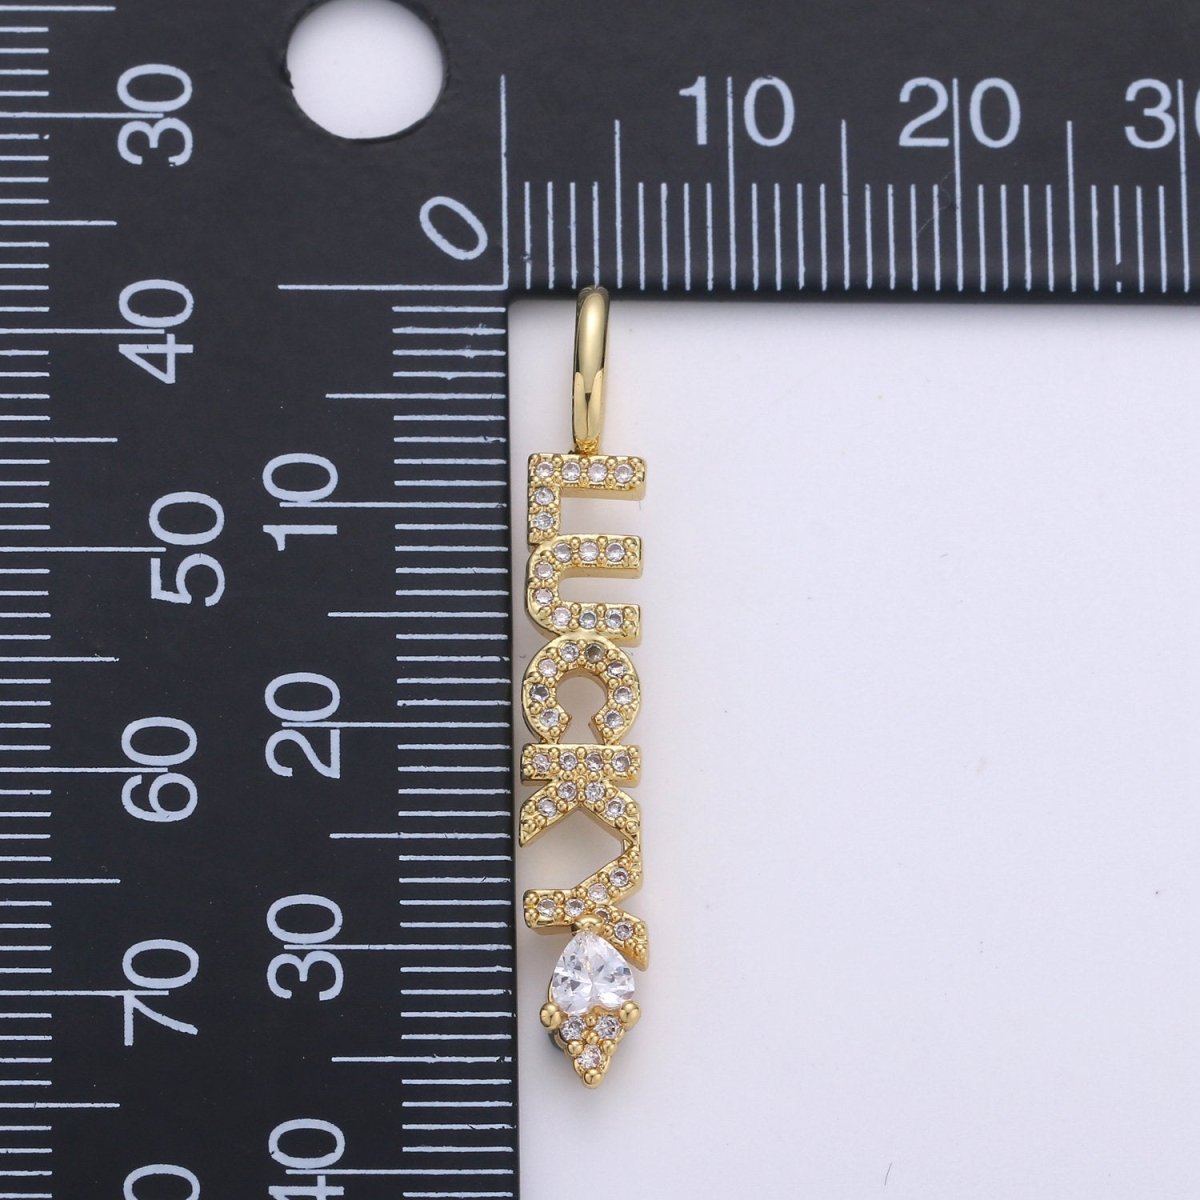 Micro Pave Charm 14k Gold Filled Lucky Pendant Statement Charm Wording charm, Positive Word Jewelry Making Supply, 35x6mm, D-103 - DLUXCA